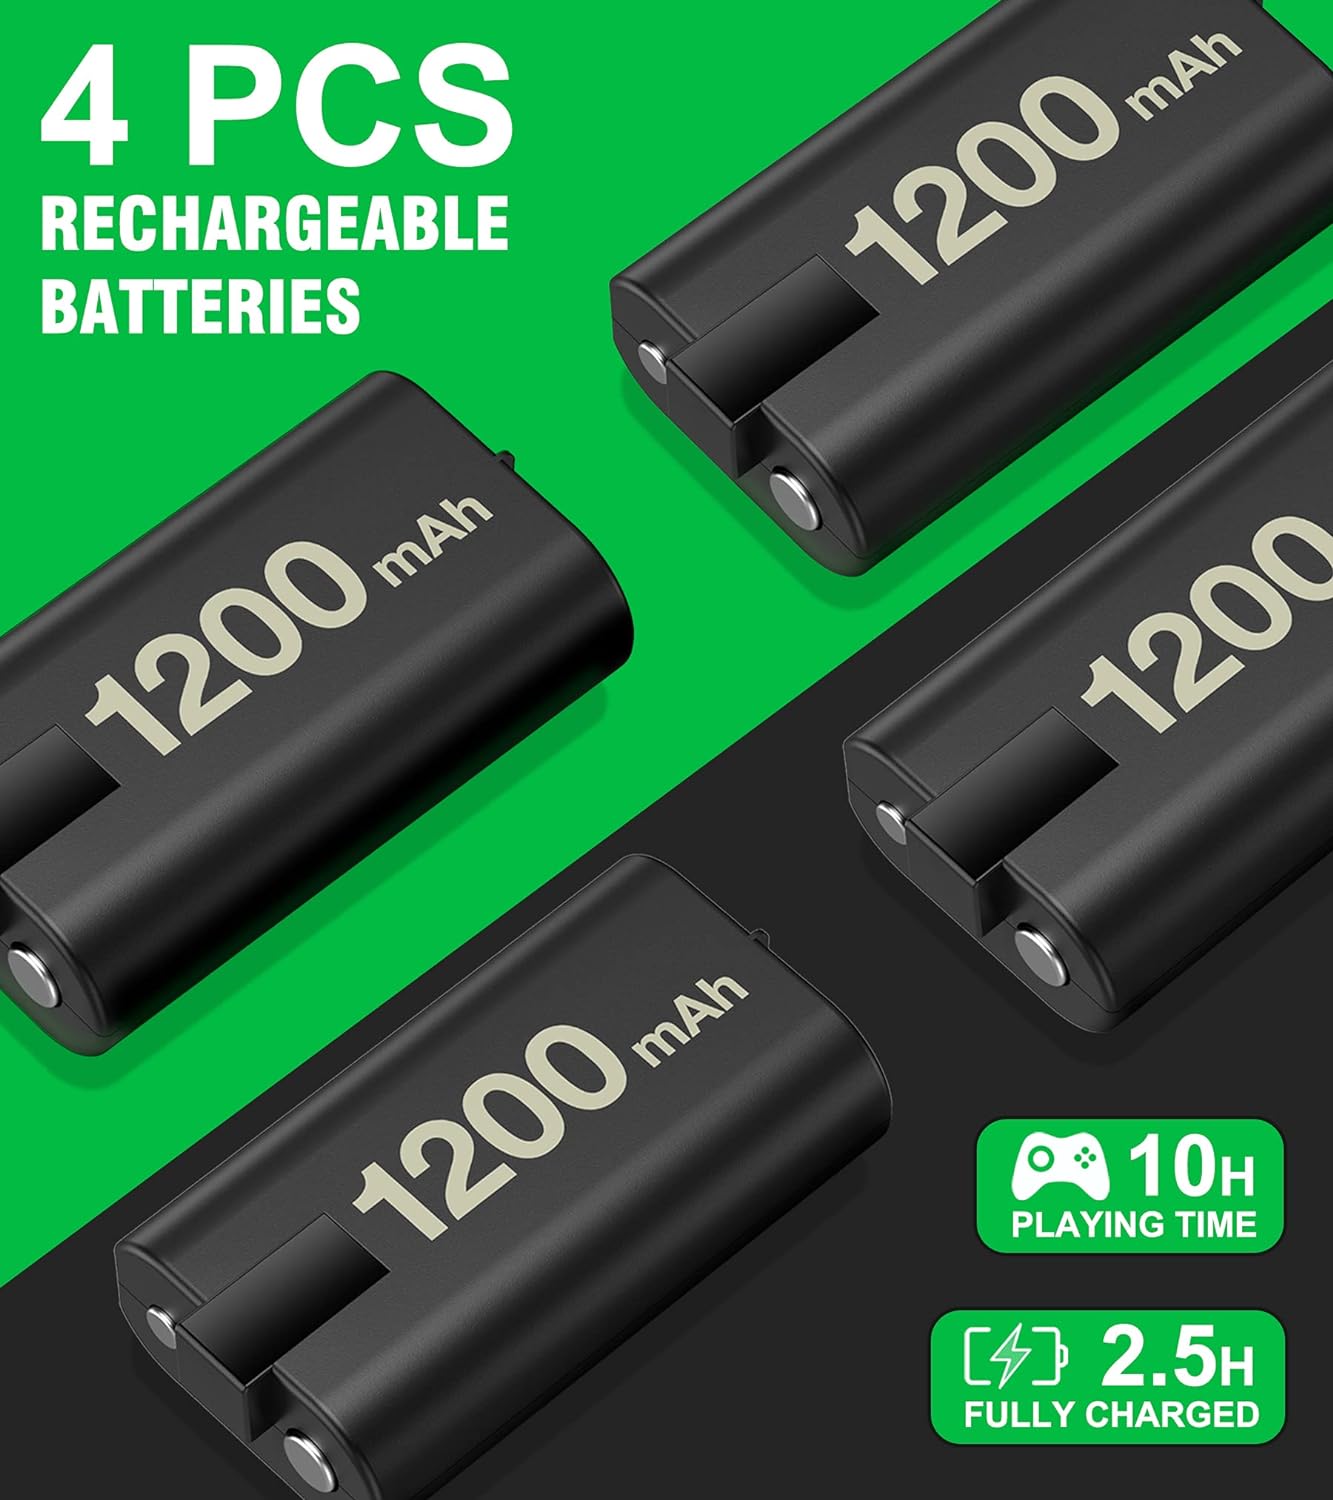 Charger for Xbox One Controller Battery Pack with 4x1200mAh (4x2880mWh) USB Rechargeable Xbox One Battery Charger Station for Xbox Series X|S, Xbox One S/One X/Elite Controllers-Xbox One Accessories